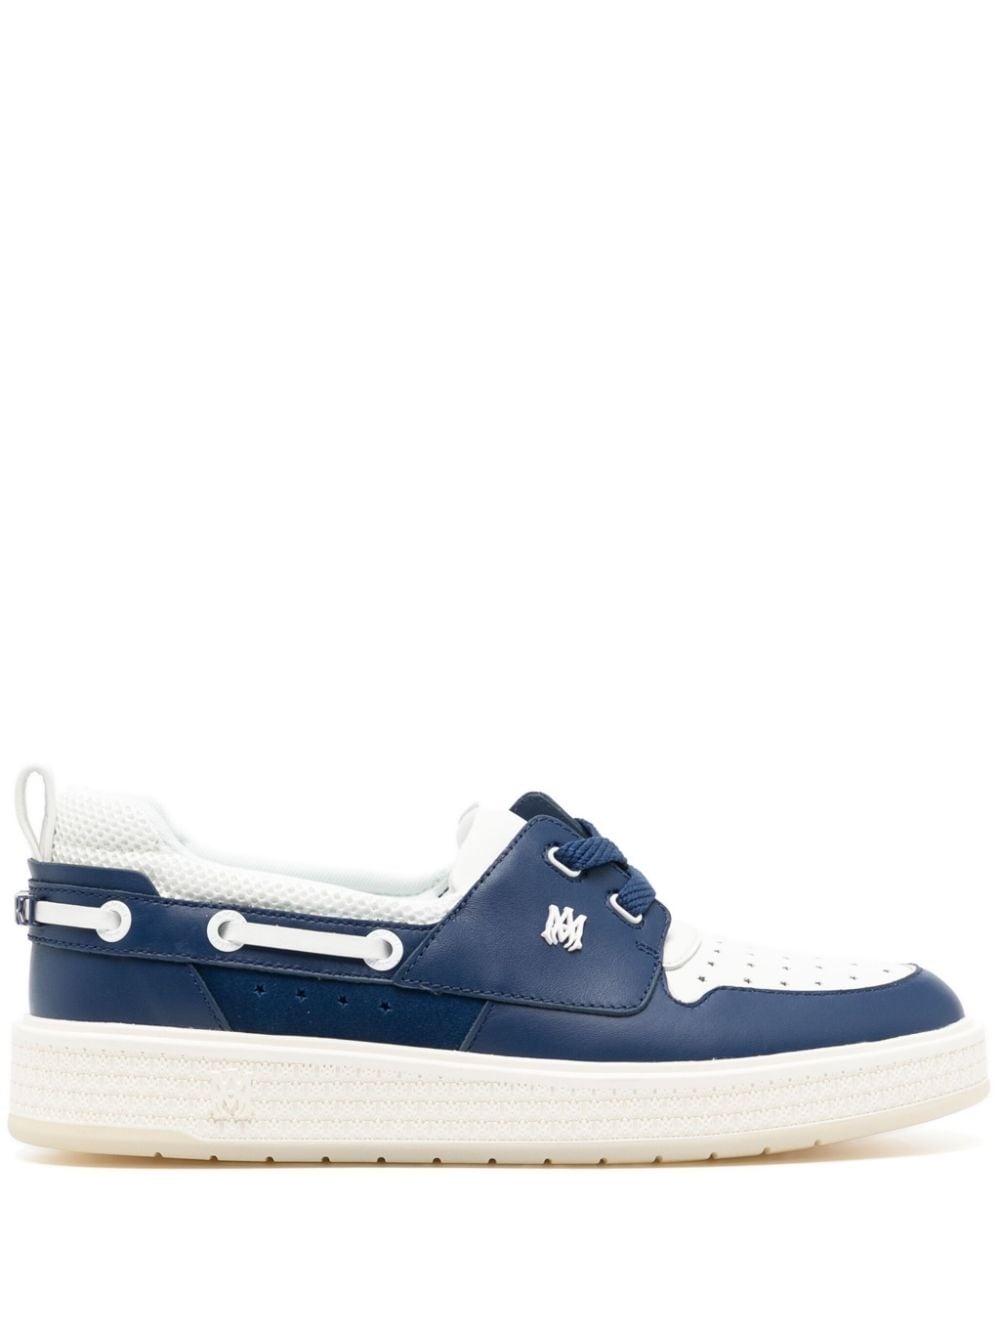 MA panelled boat shoes - 1